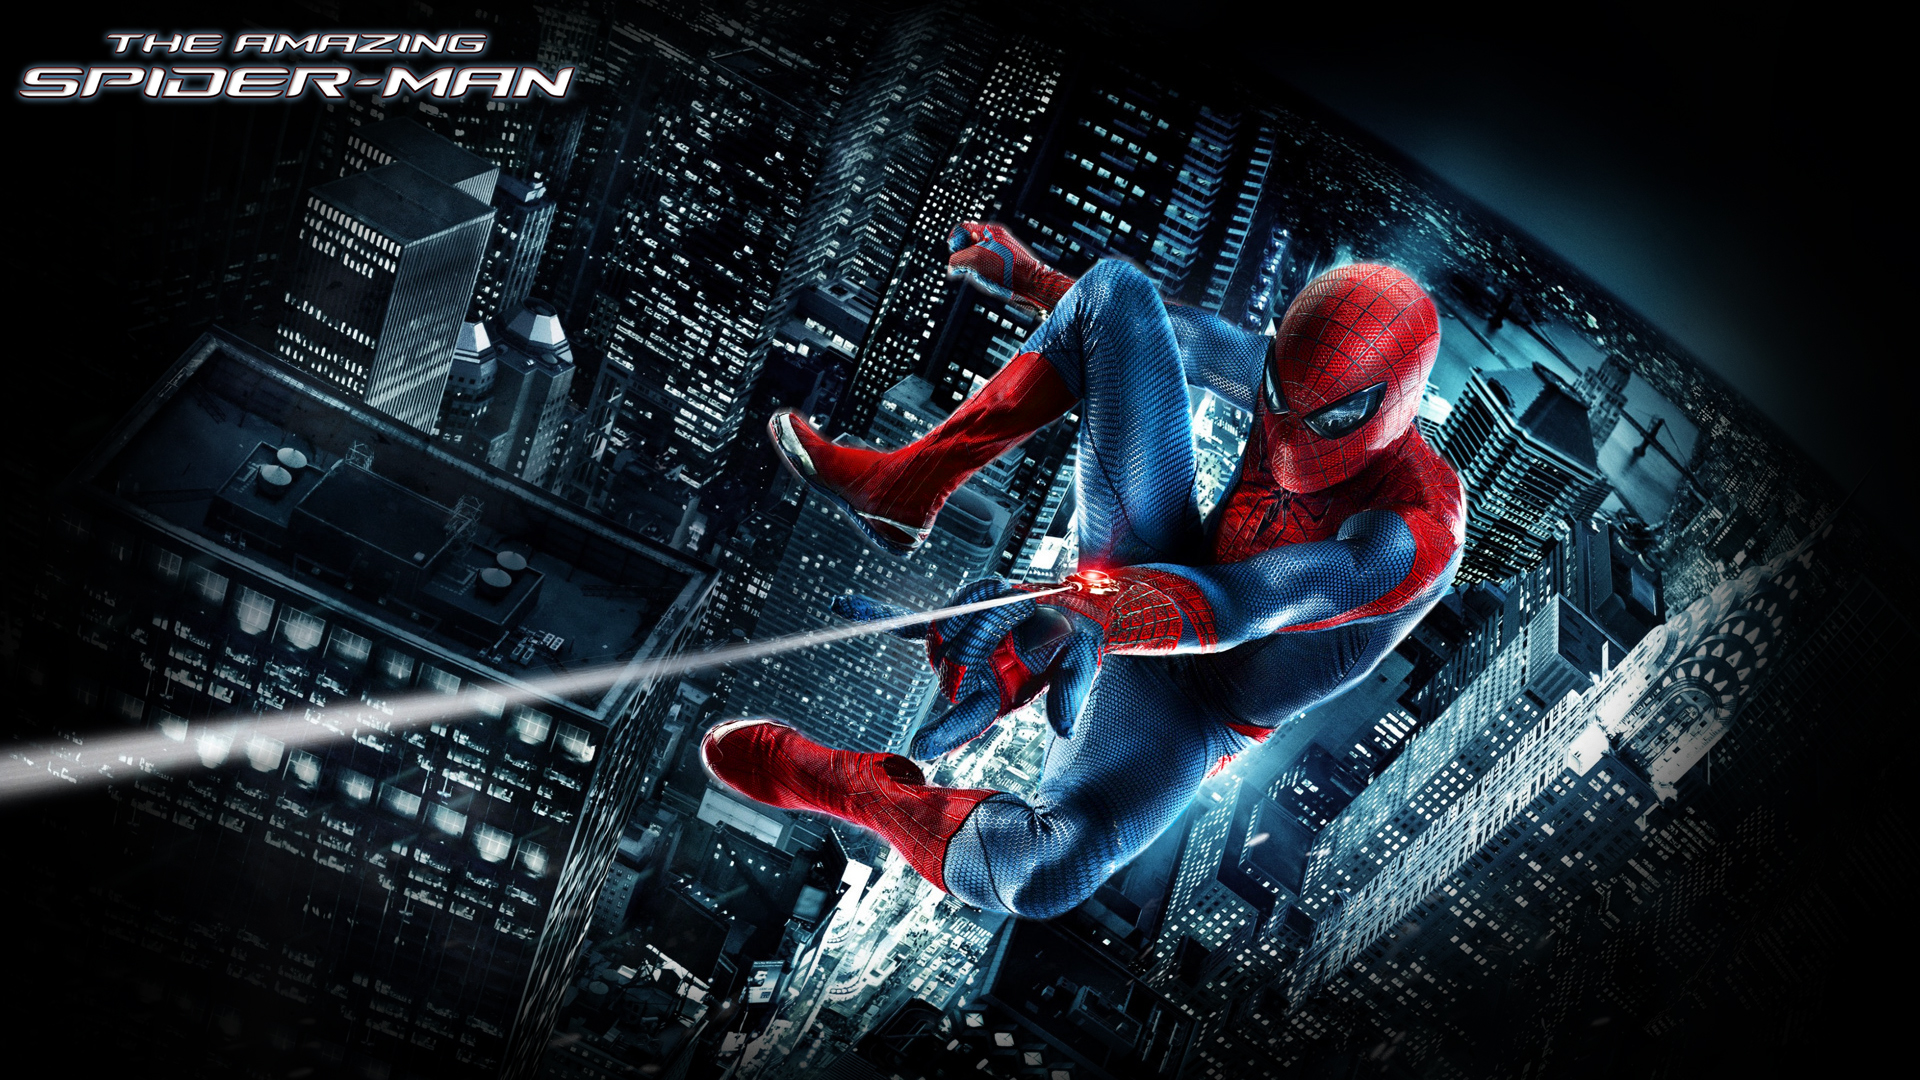 The Amazing Spider-Man FULL HD - PS3 Themes